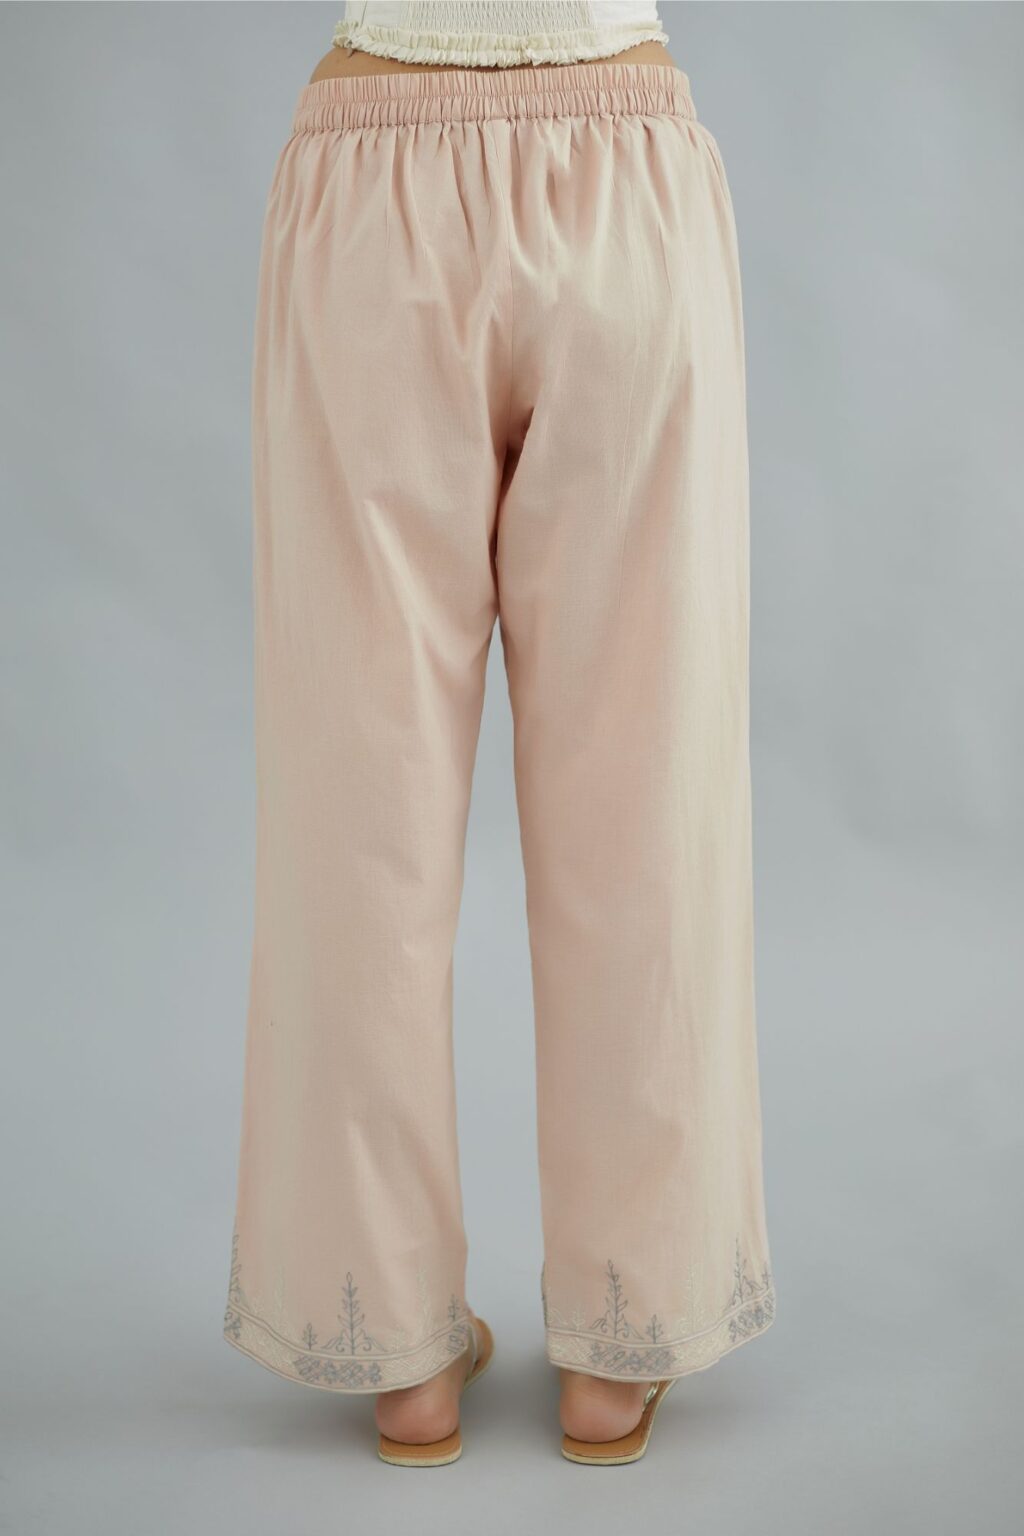 Pink straight cotton pants with thread embroidery at bottom hem